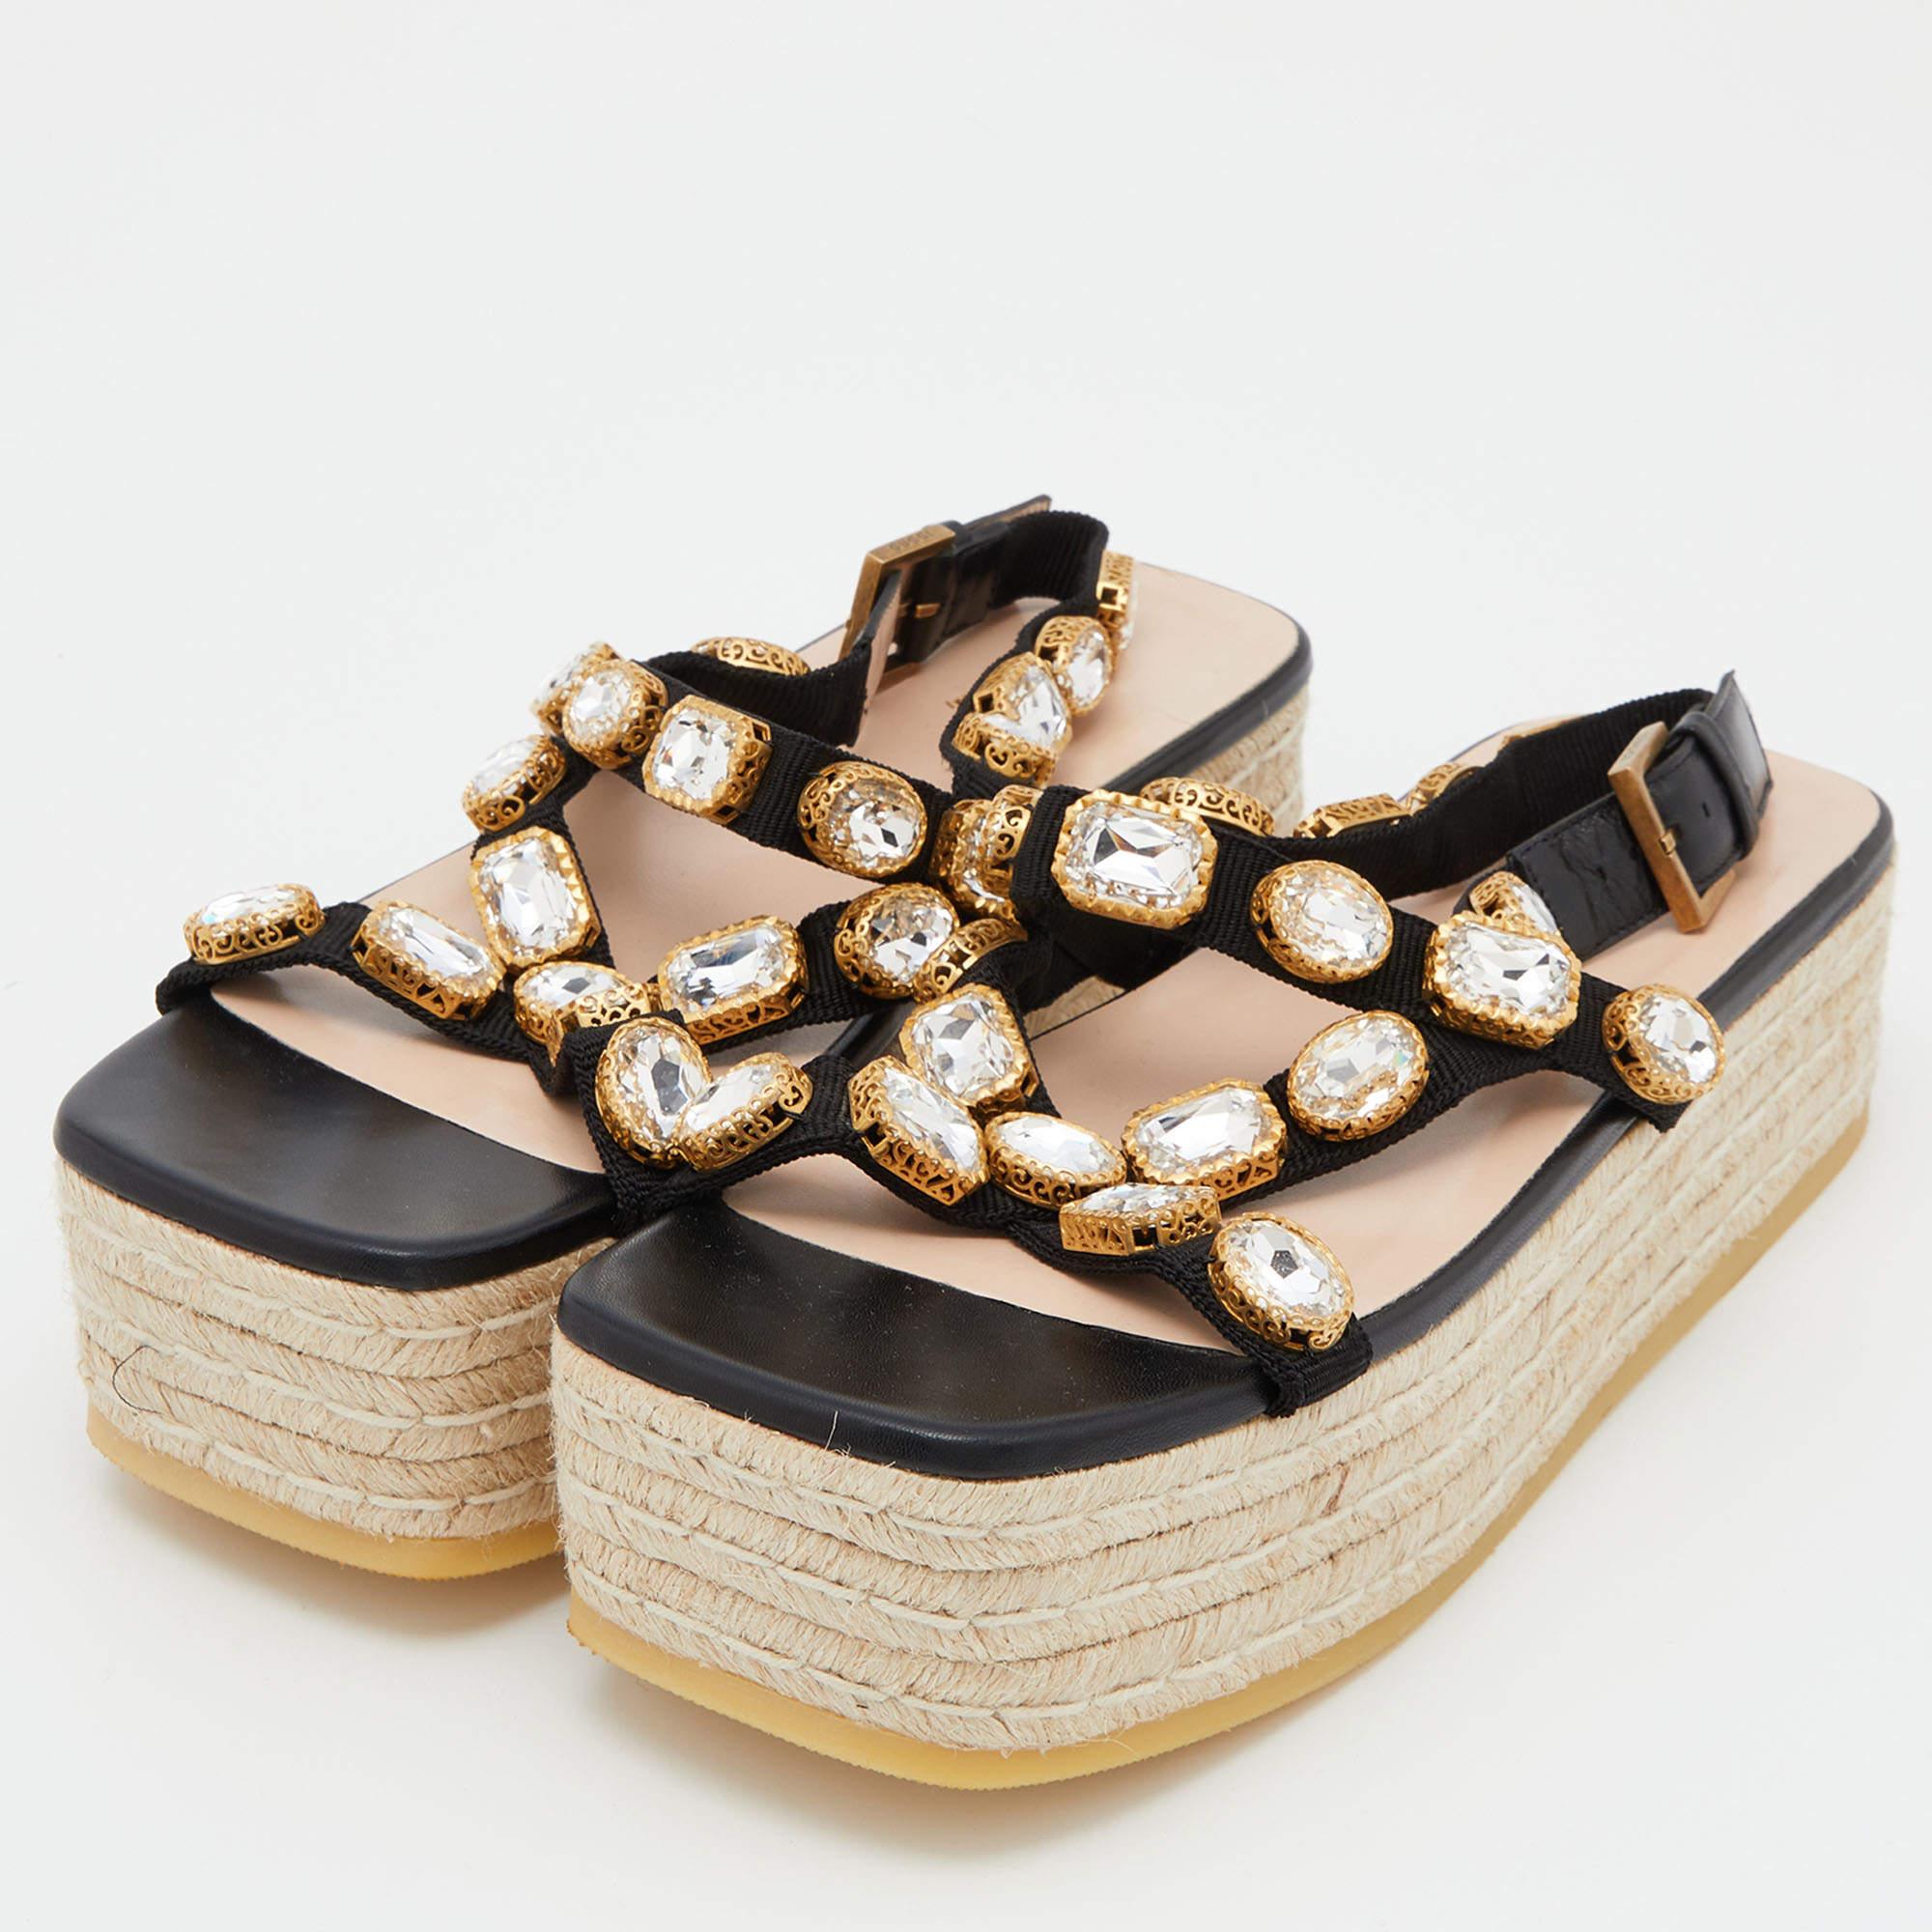 Gucci's Pepita has a Geta-inspired design with a statement size and crystals embellished on the strappy uppers. The espadrille platform sandals are perfect with a light dress and a straw bag if you're curating your summer edit.

